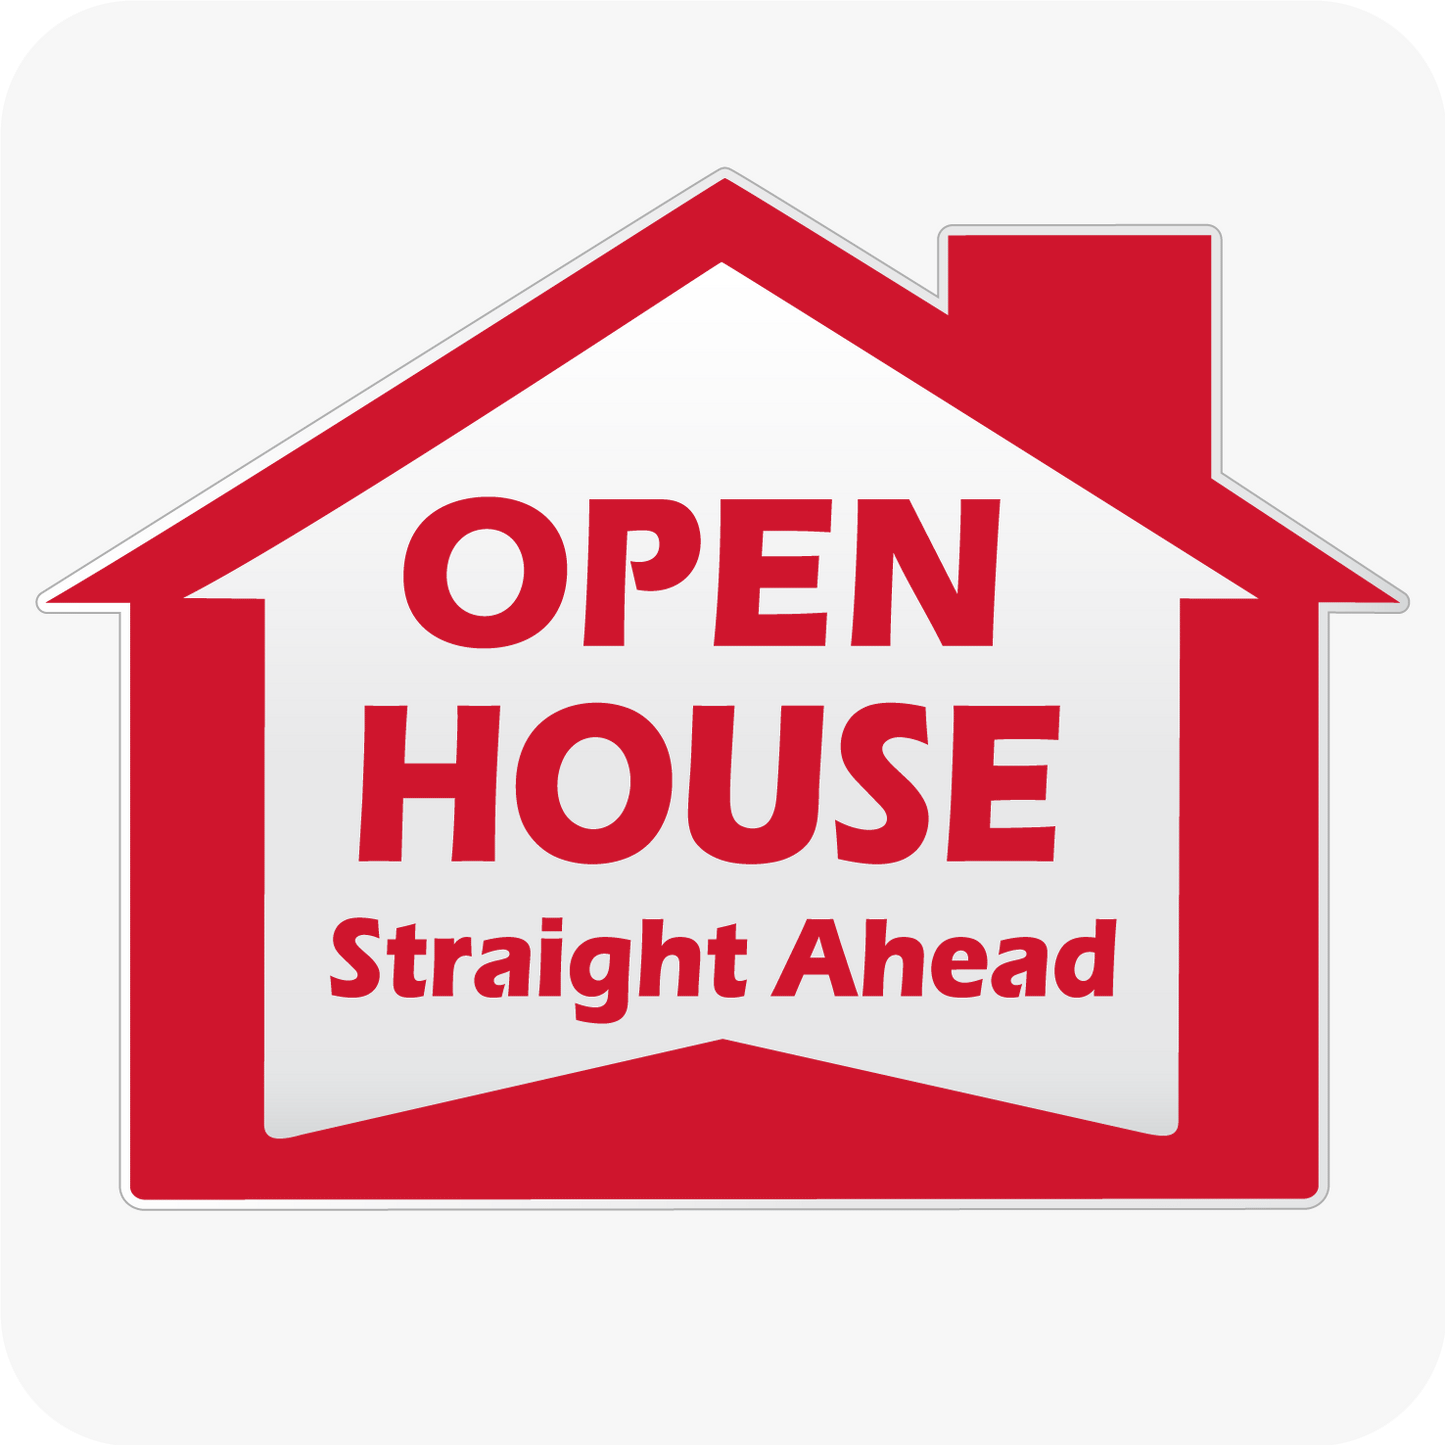 Open House Straight Ahead - House Shaped Sign 18x24 - Red